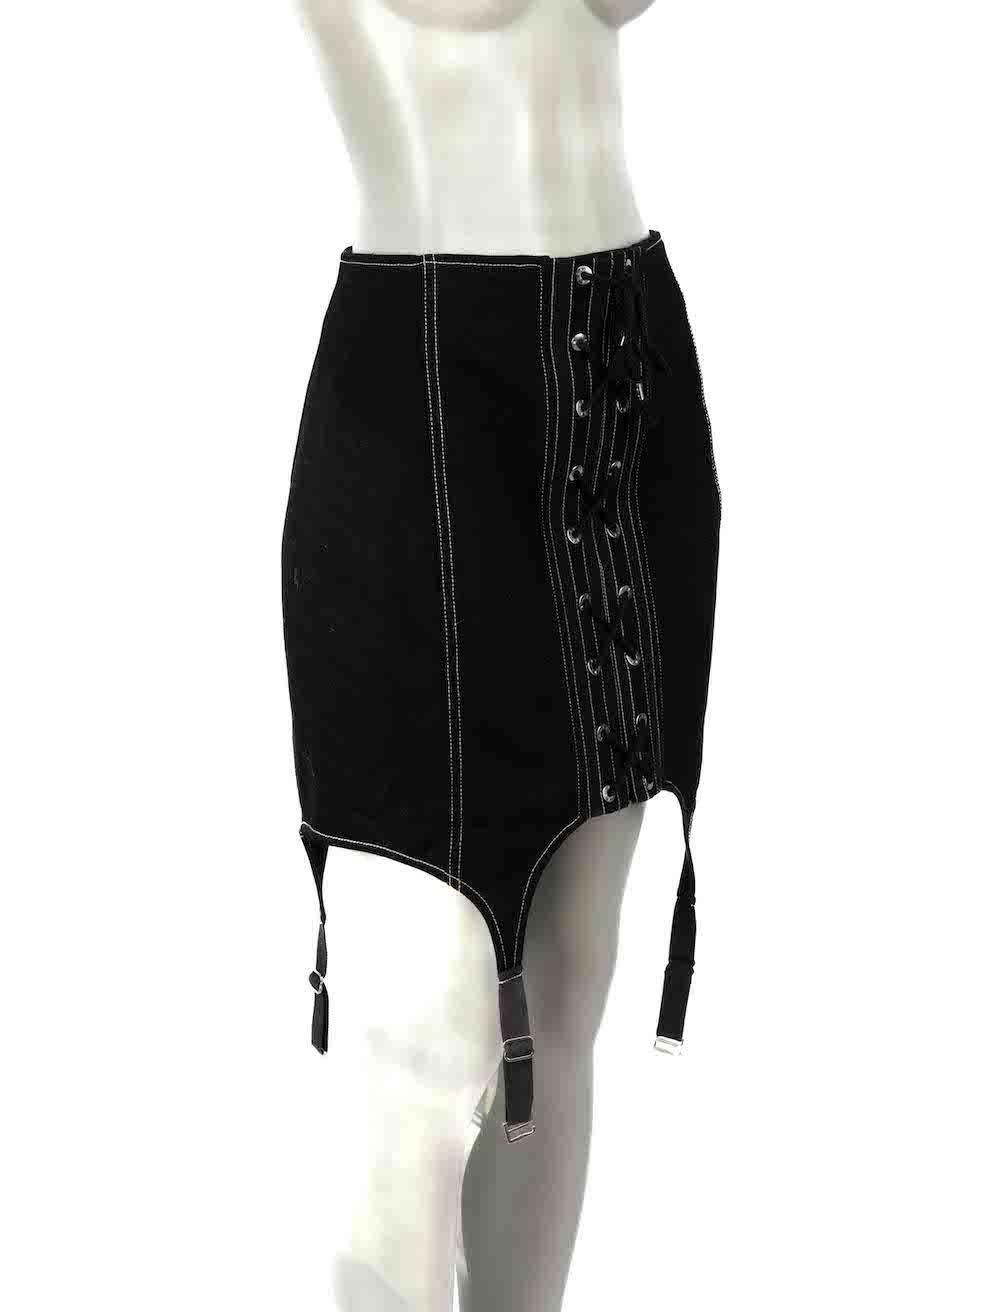 CONDITION is Very good. Hardly any visible wear to dress is evident on this used Dion Lee designer resale item.
 
Details
Black
Cotton
Skirt
Lace up
Garter detail
Back zip fastening
Mini
 
Made in China
 
Composition
100% Cotton

Care instructions: